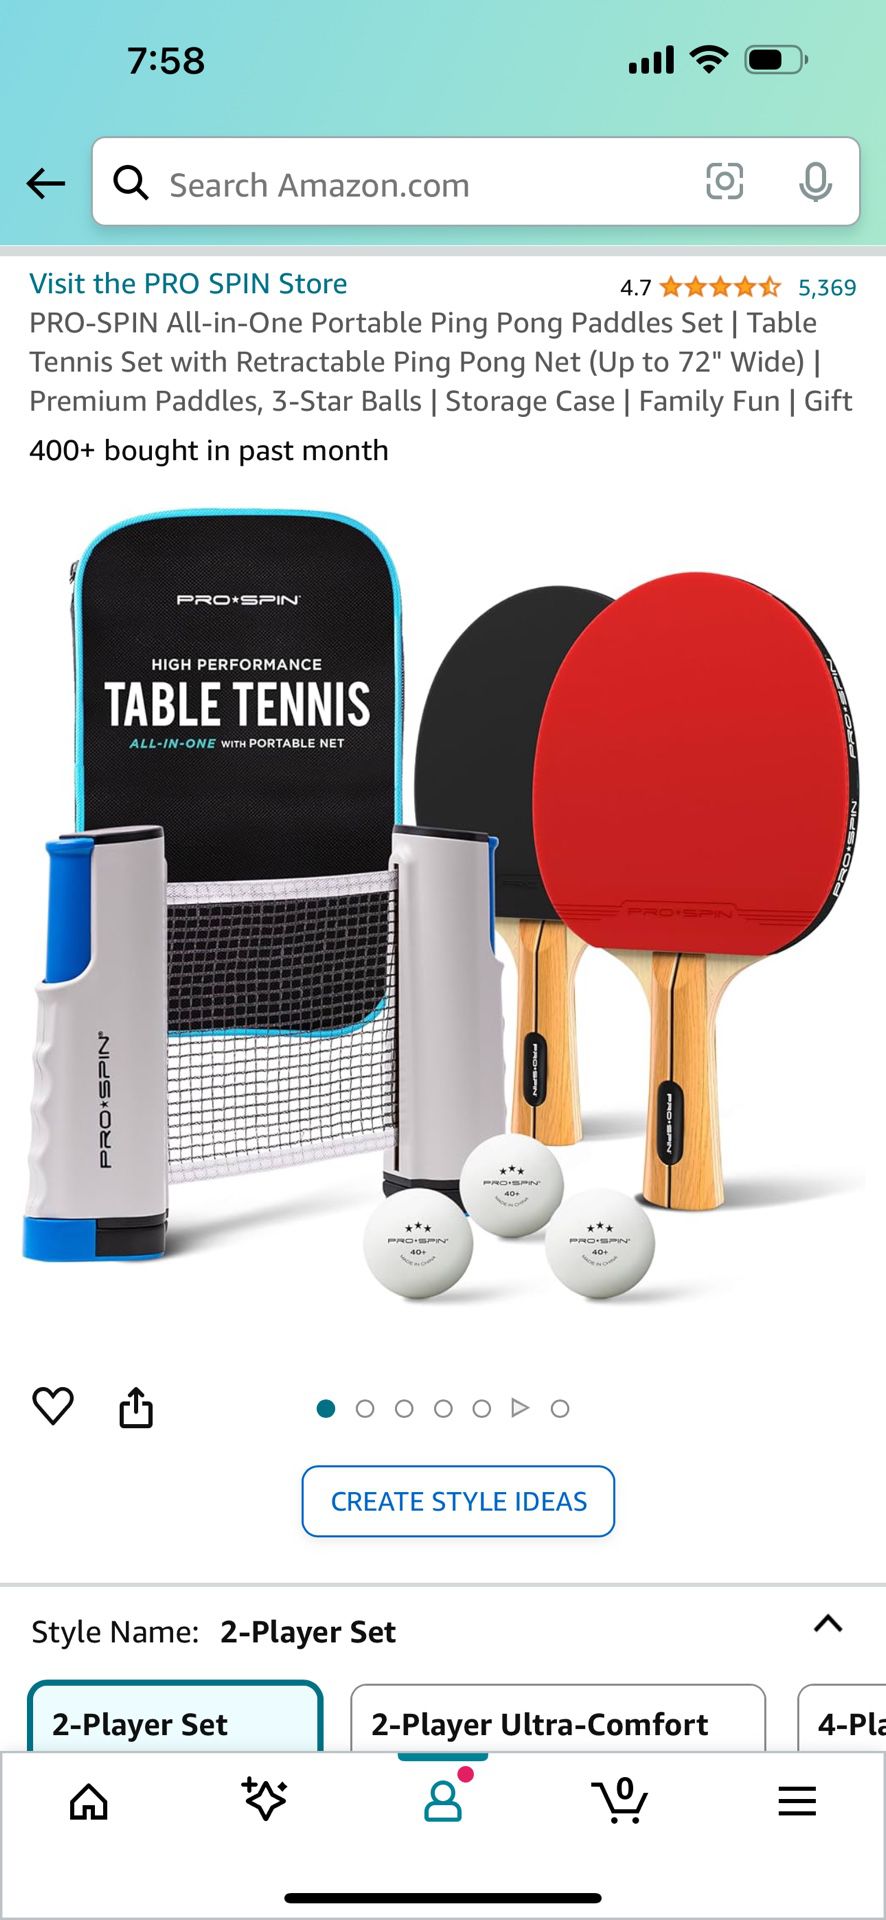 PRO-SPIN All-in-One Portable Ping Pong Paddles Set 